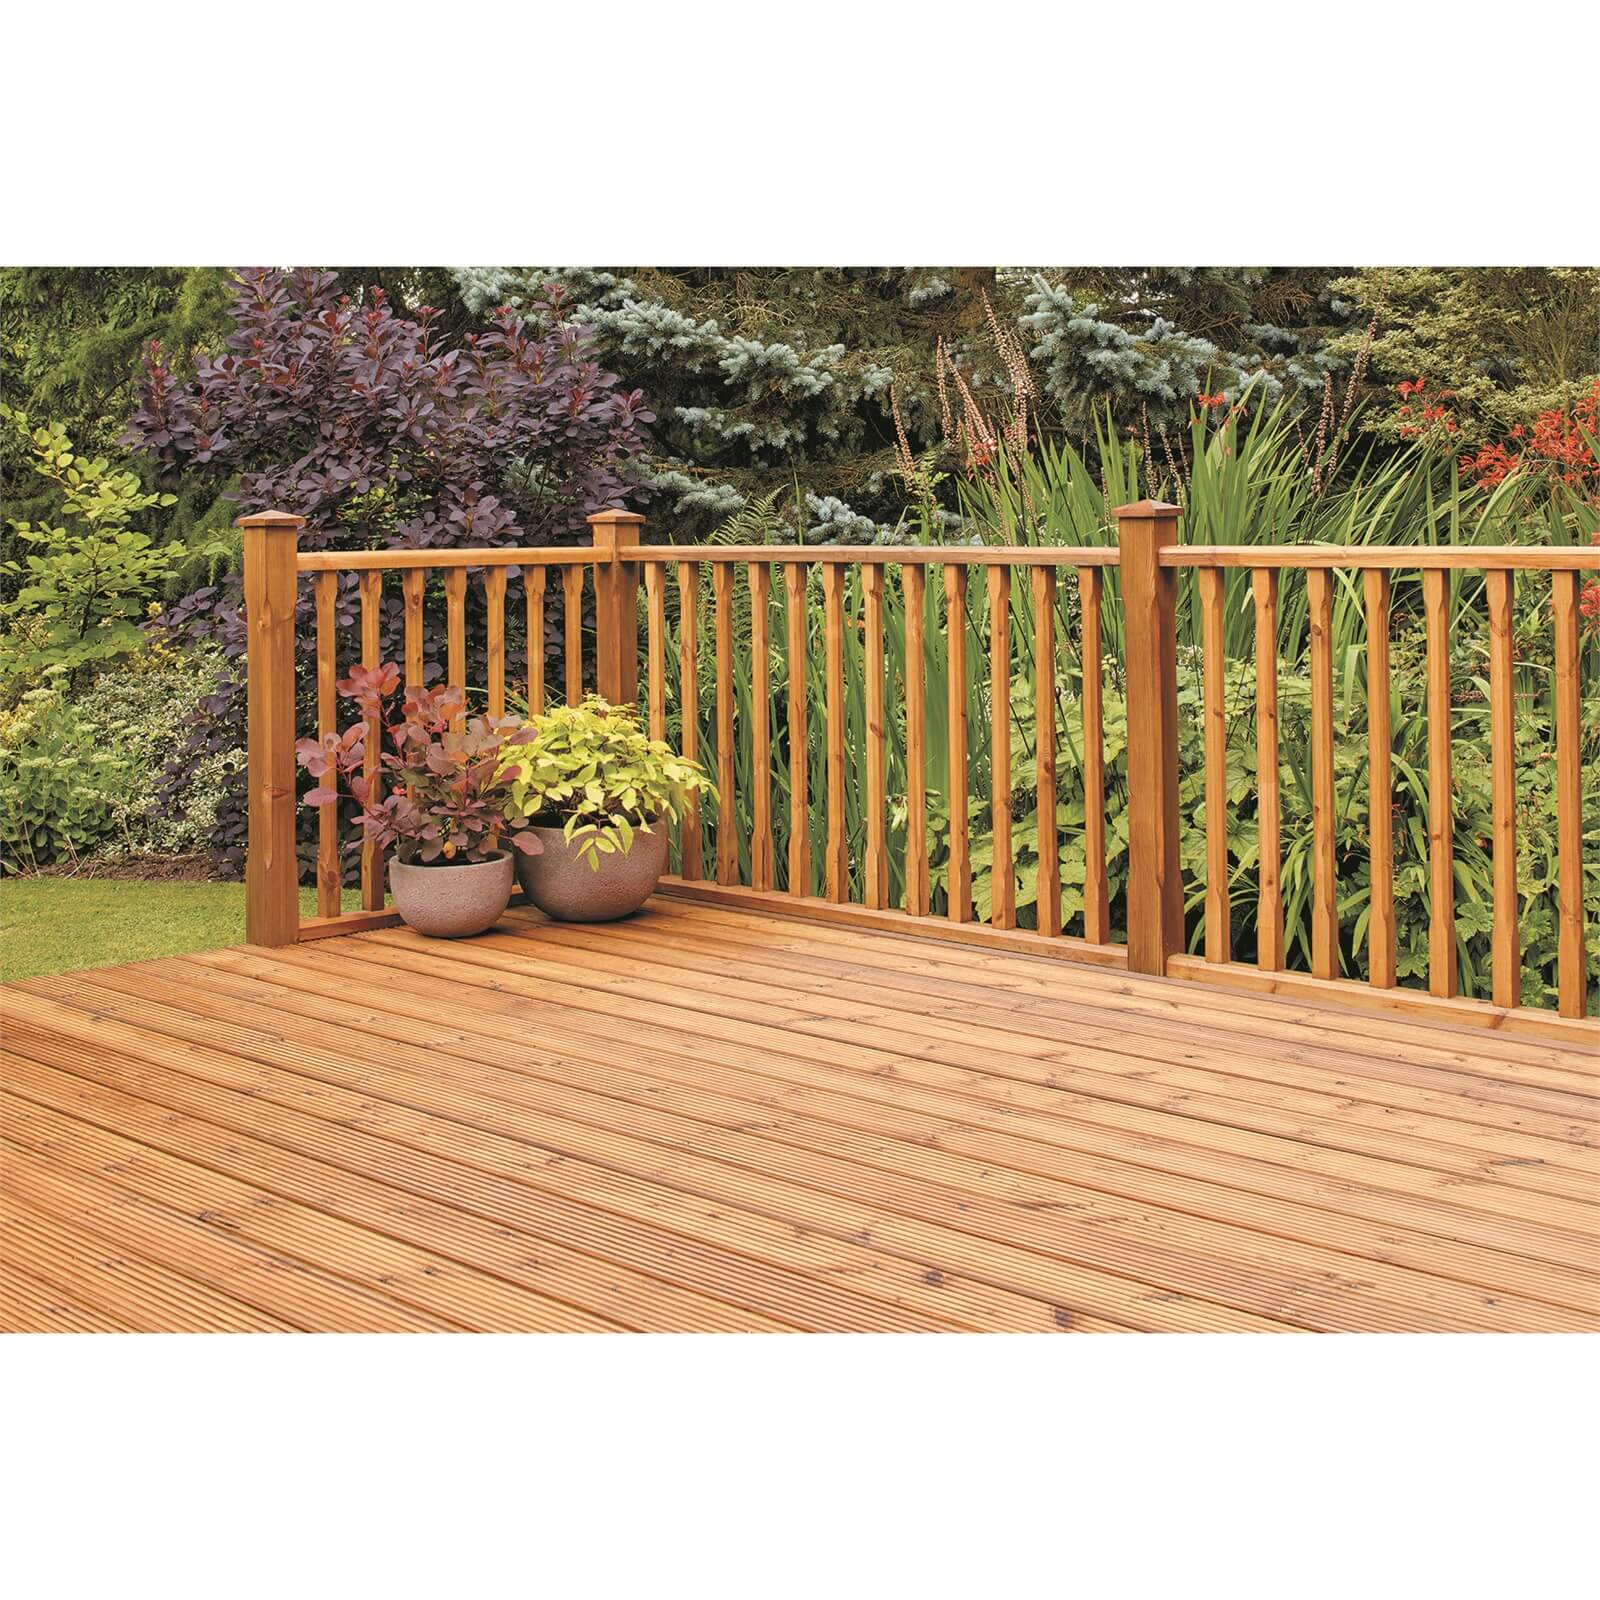 Ronseal Ultimate Protection Decking Oil Natural - 5L